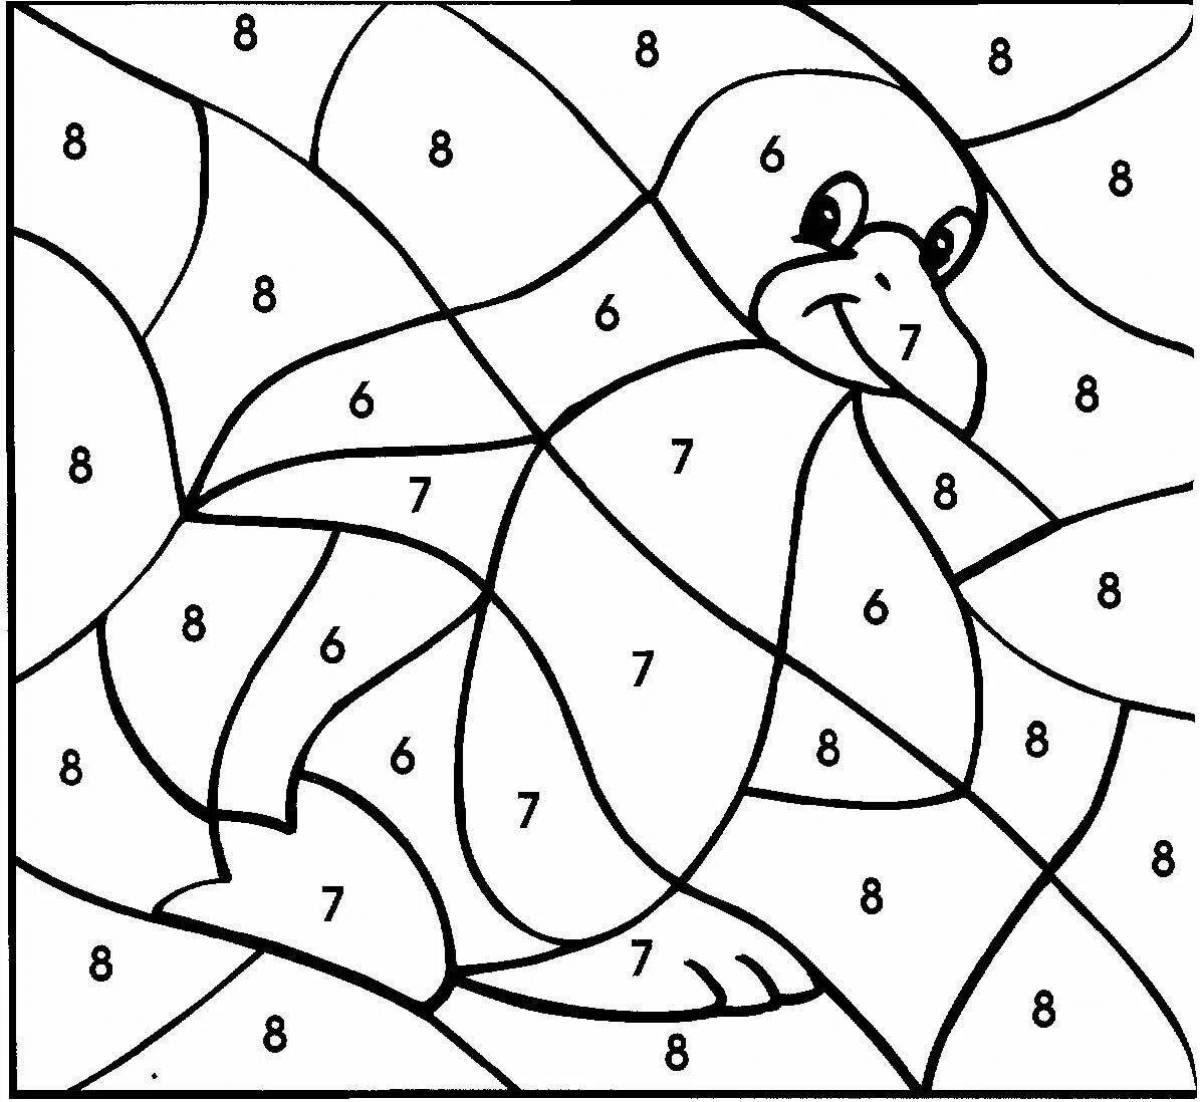 Coloring funny penguin by numbers